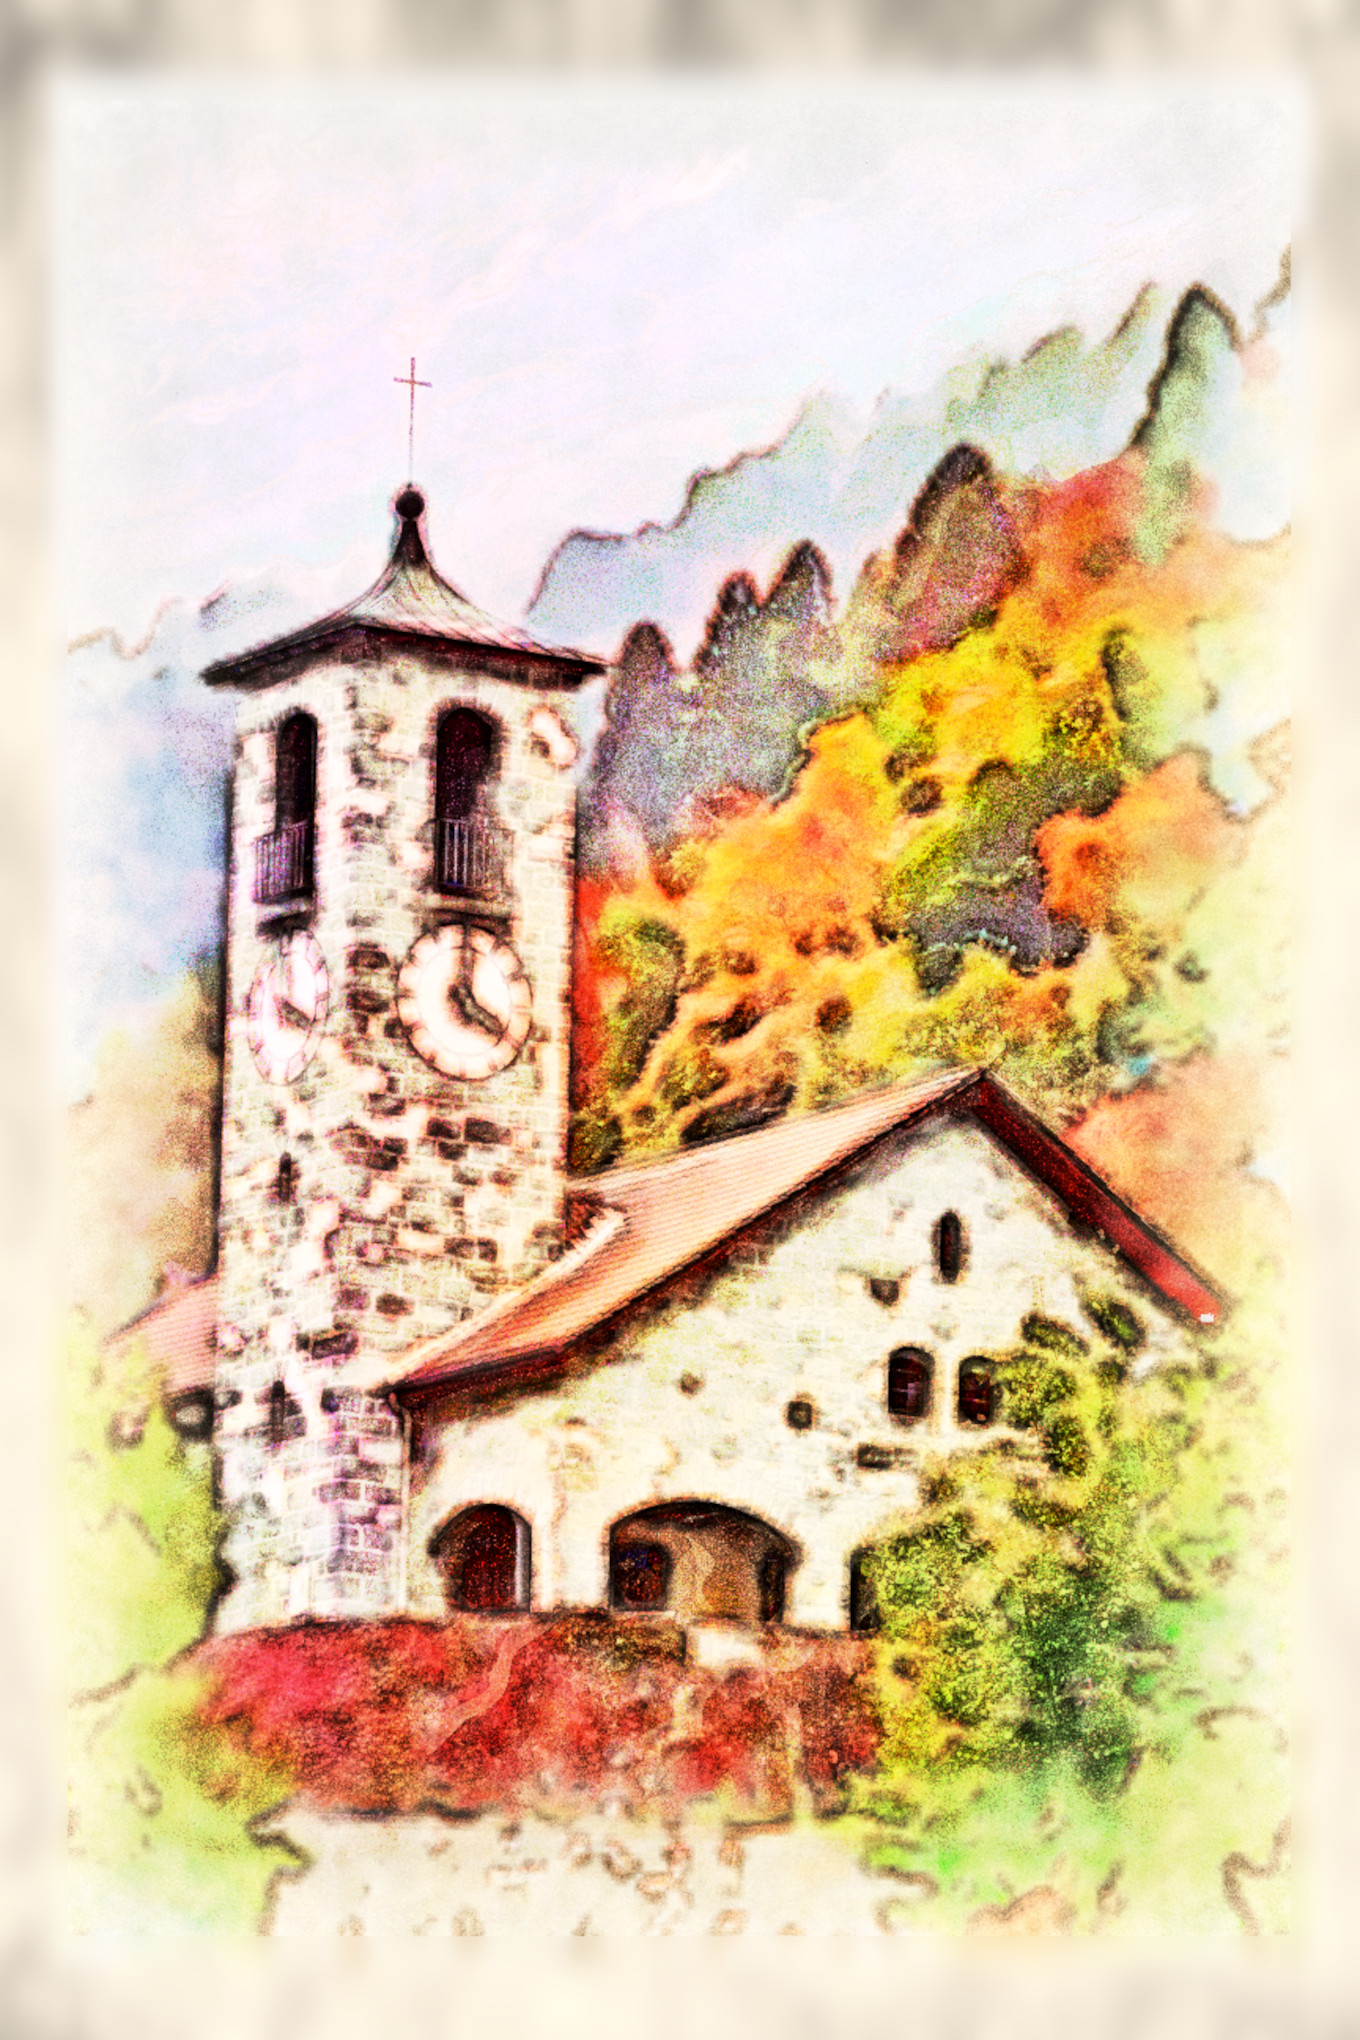 2023-10-02 18-58-47 church-2697594 with a Watercolor Pastels Effect 2023 (8.0,75.0,30.0,45.0,12.0,8.0,90.0,True,0).jpg